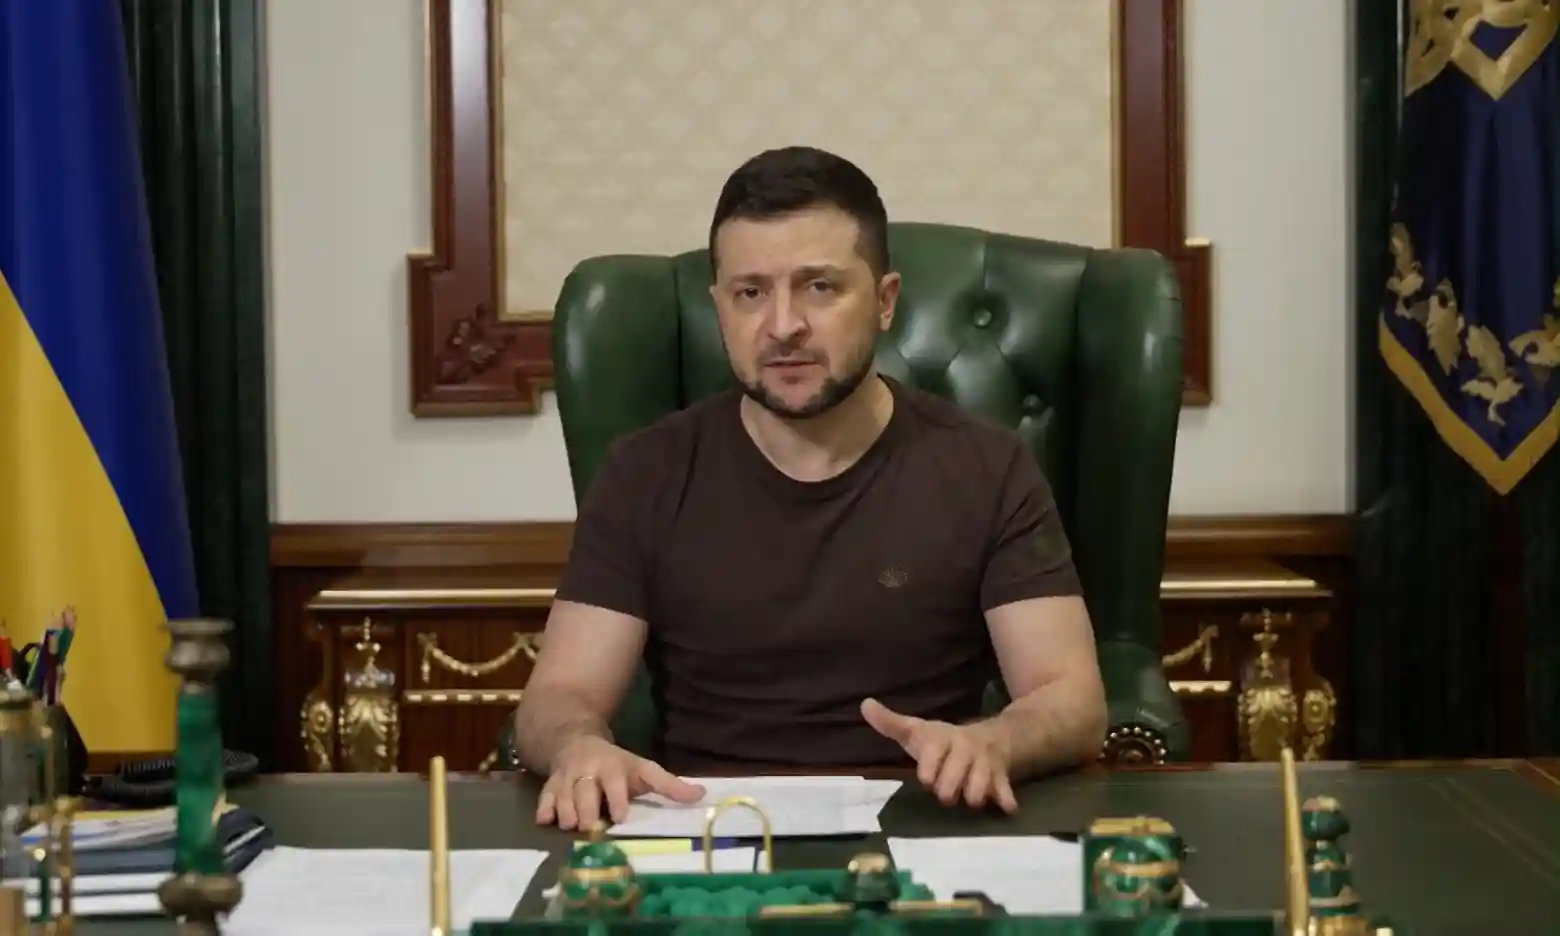 President Voldymyr Zelenskiy said Ukraine will never bow to ultimatums from Russia and cities such as Kyiv, Mariupol or Kharkiv will not accept Russian occupation, Defense Express